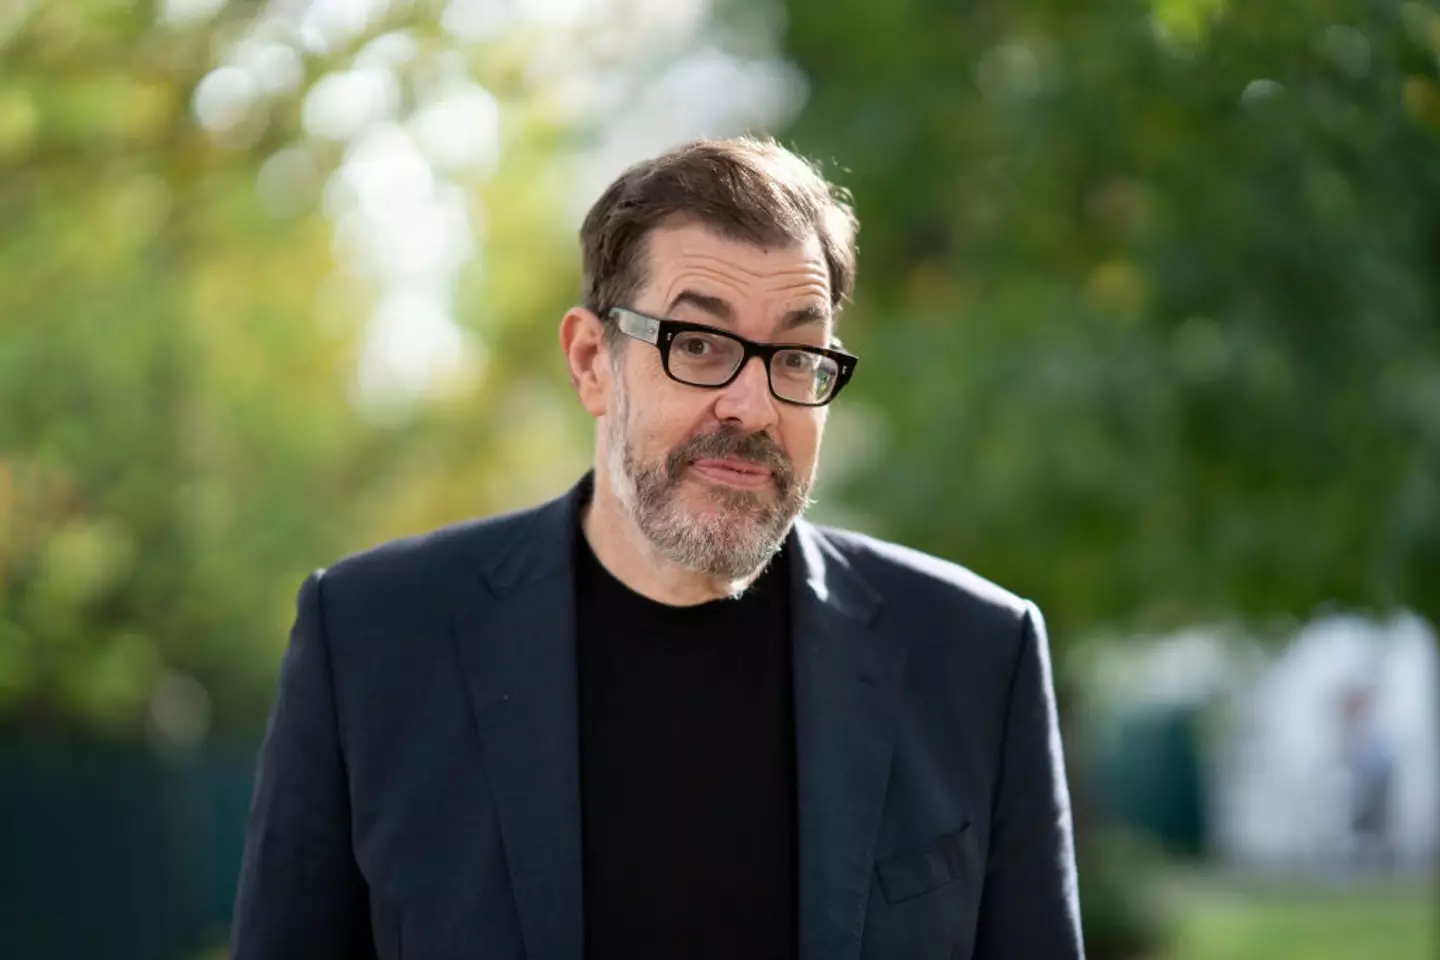 Richard Osman was candid about his addiction. (David Levenson/Getty Images)